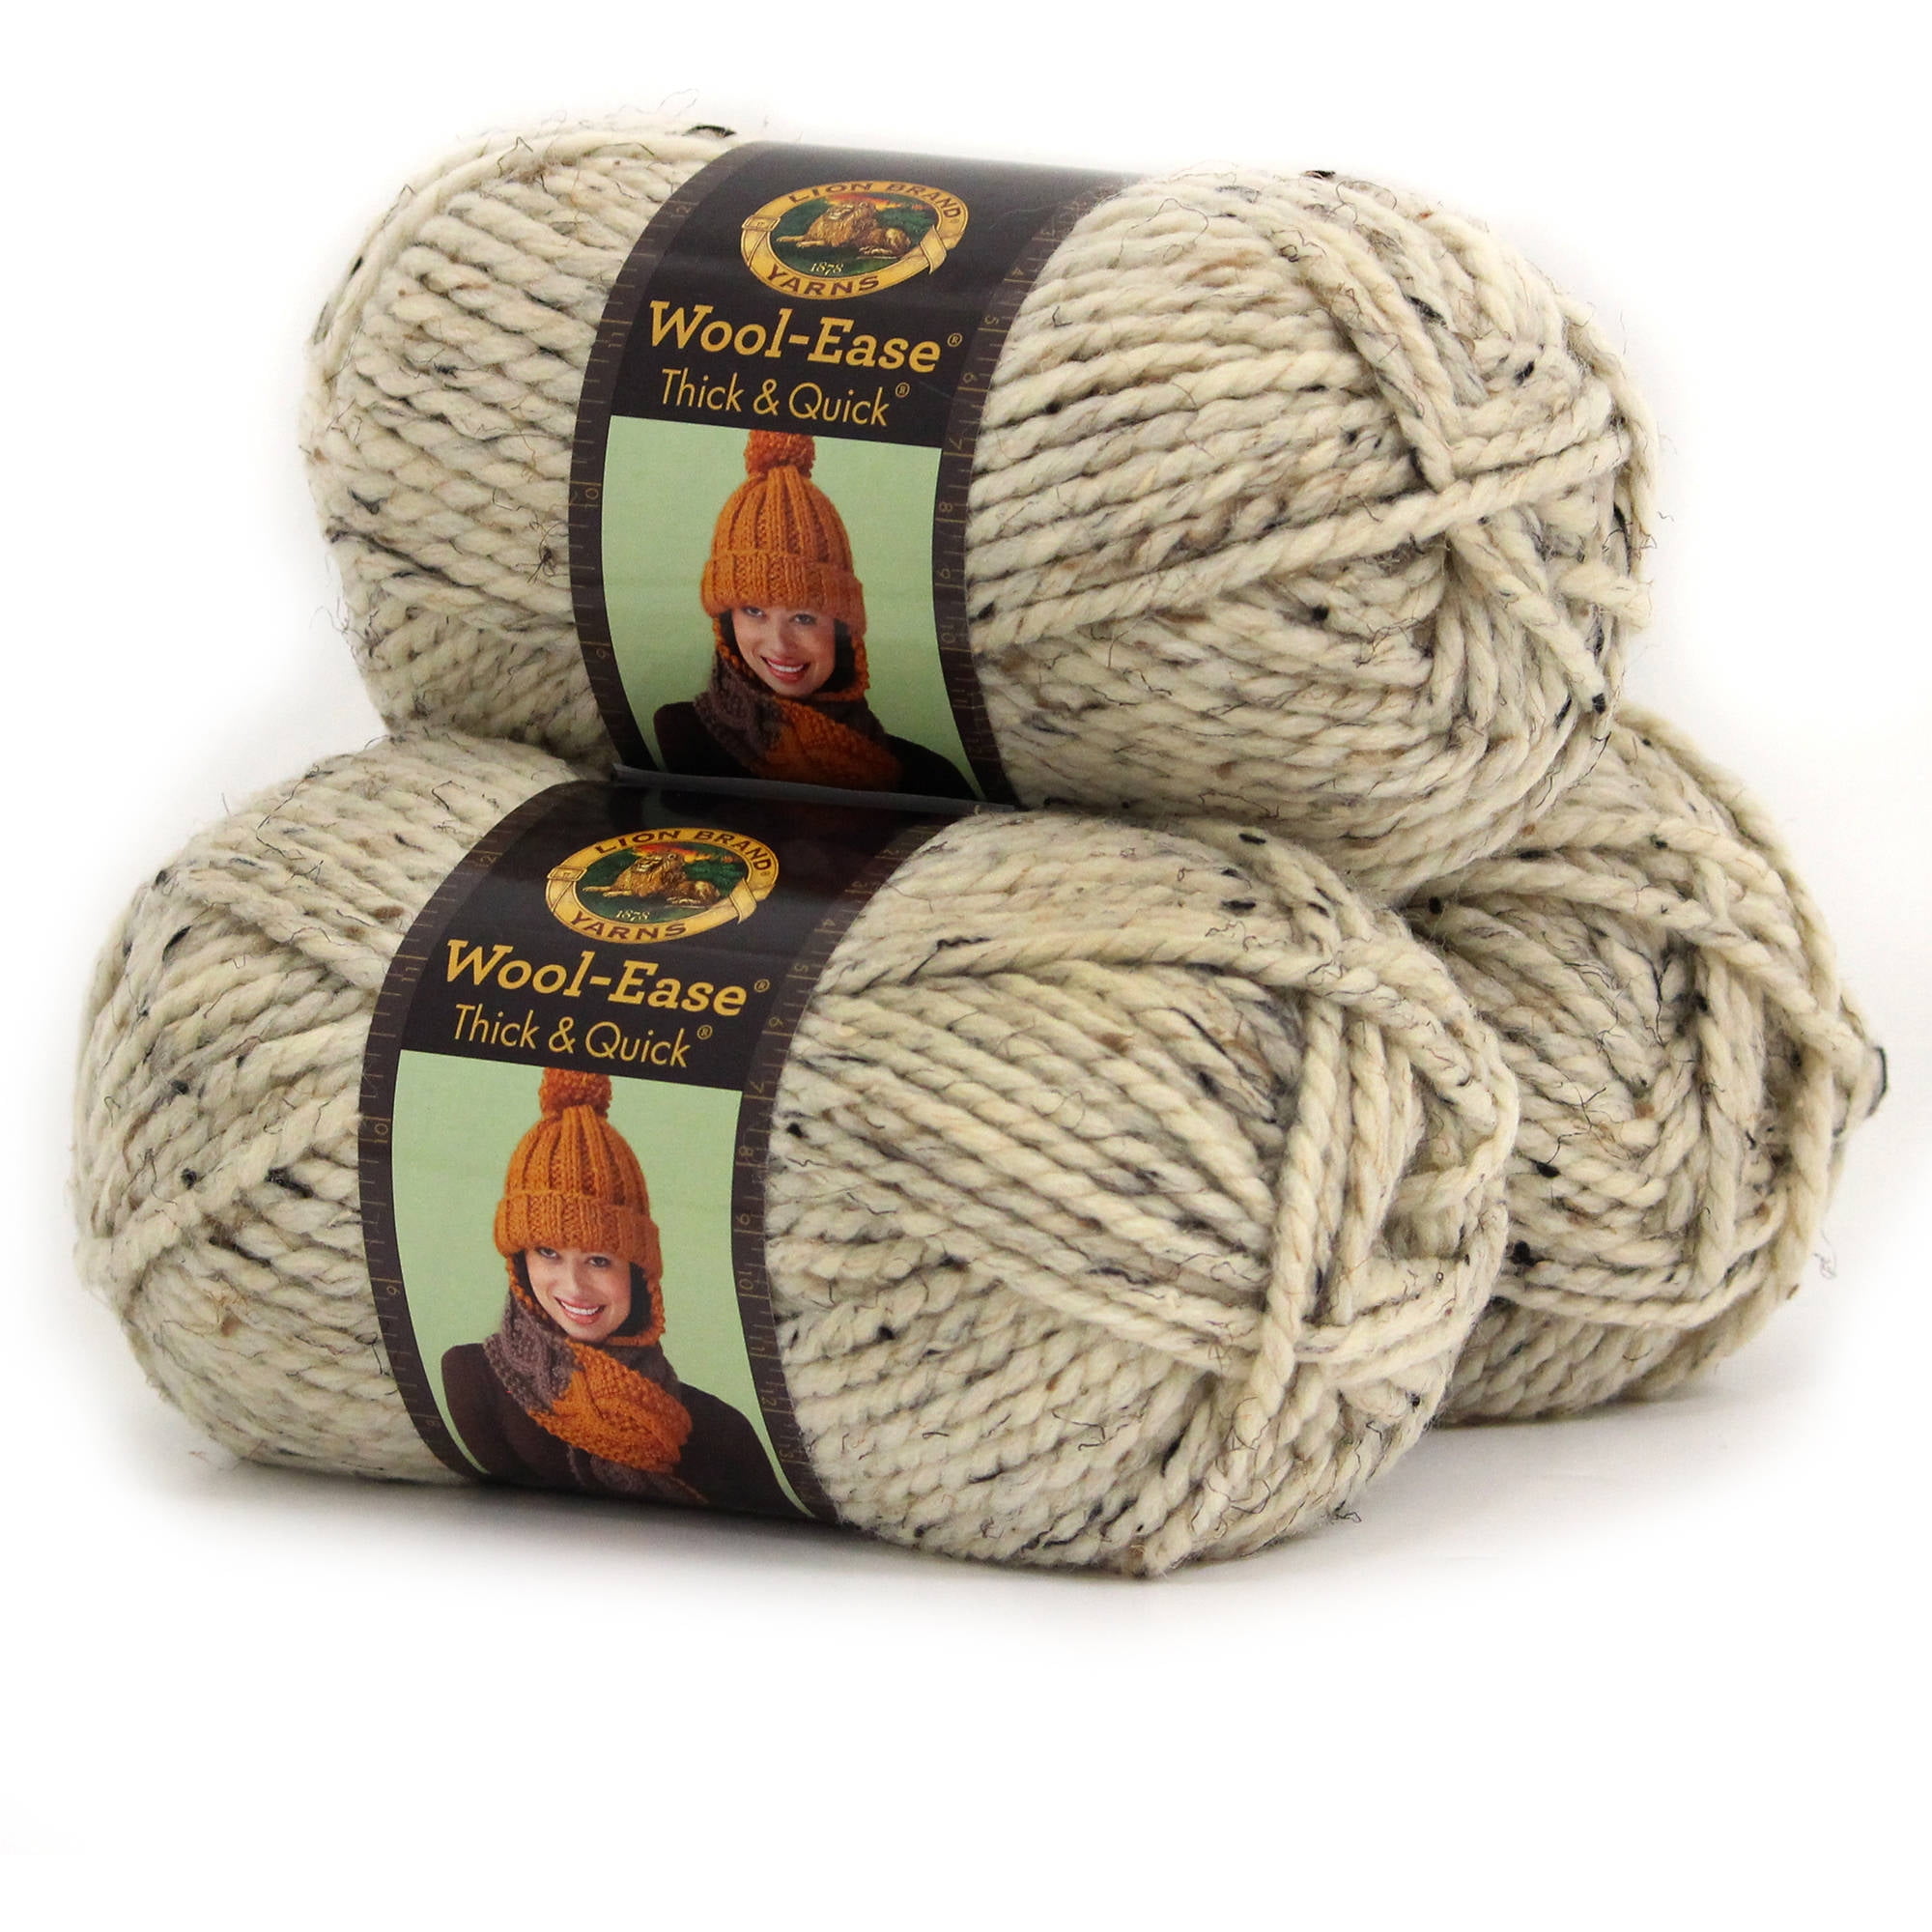 Lion Brand Wool-Ease Thick & Quick Yarn-Peanut, 1 count - Harris Teeter